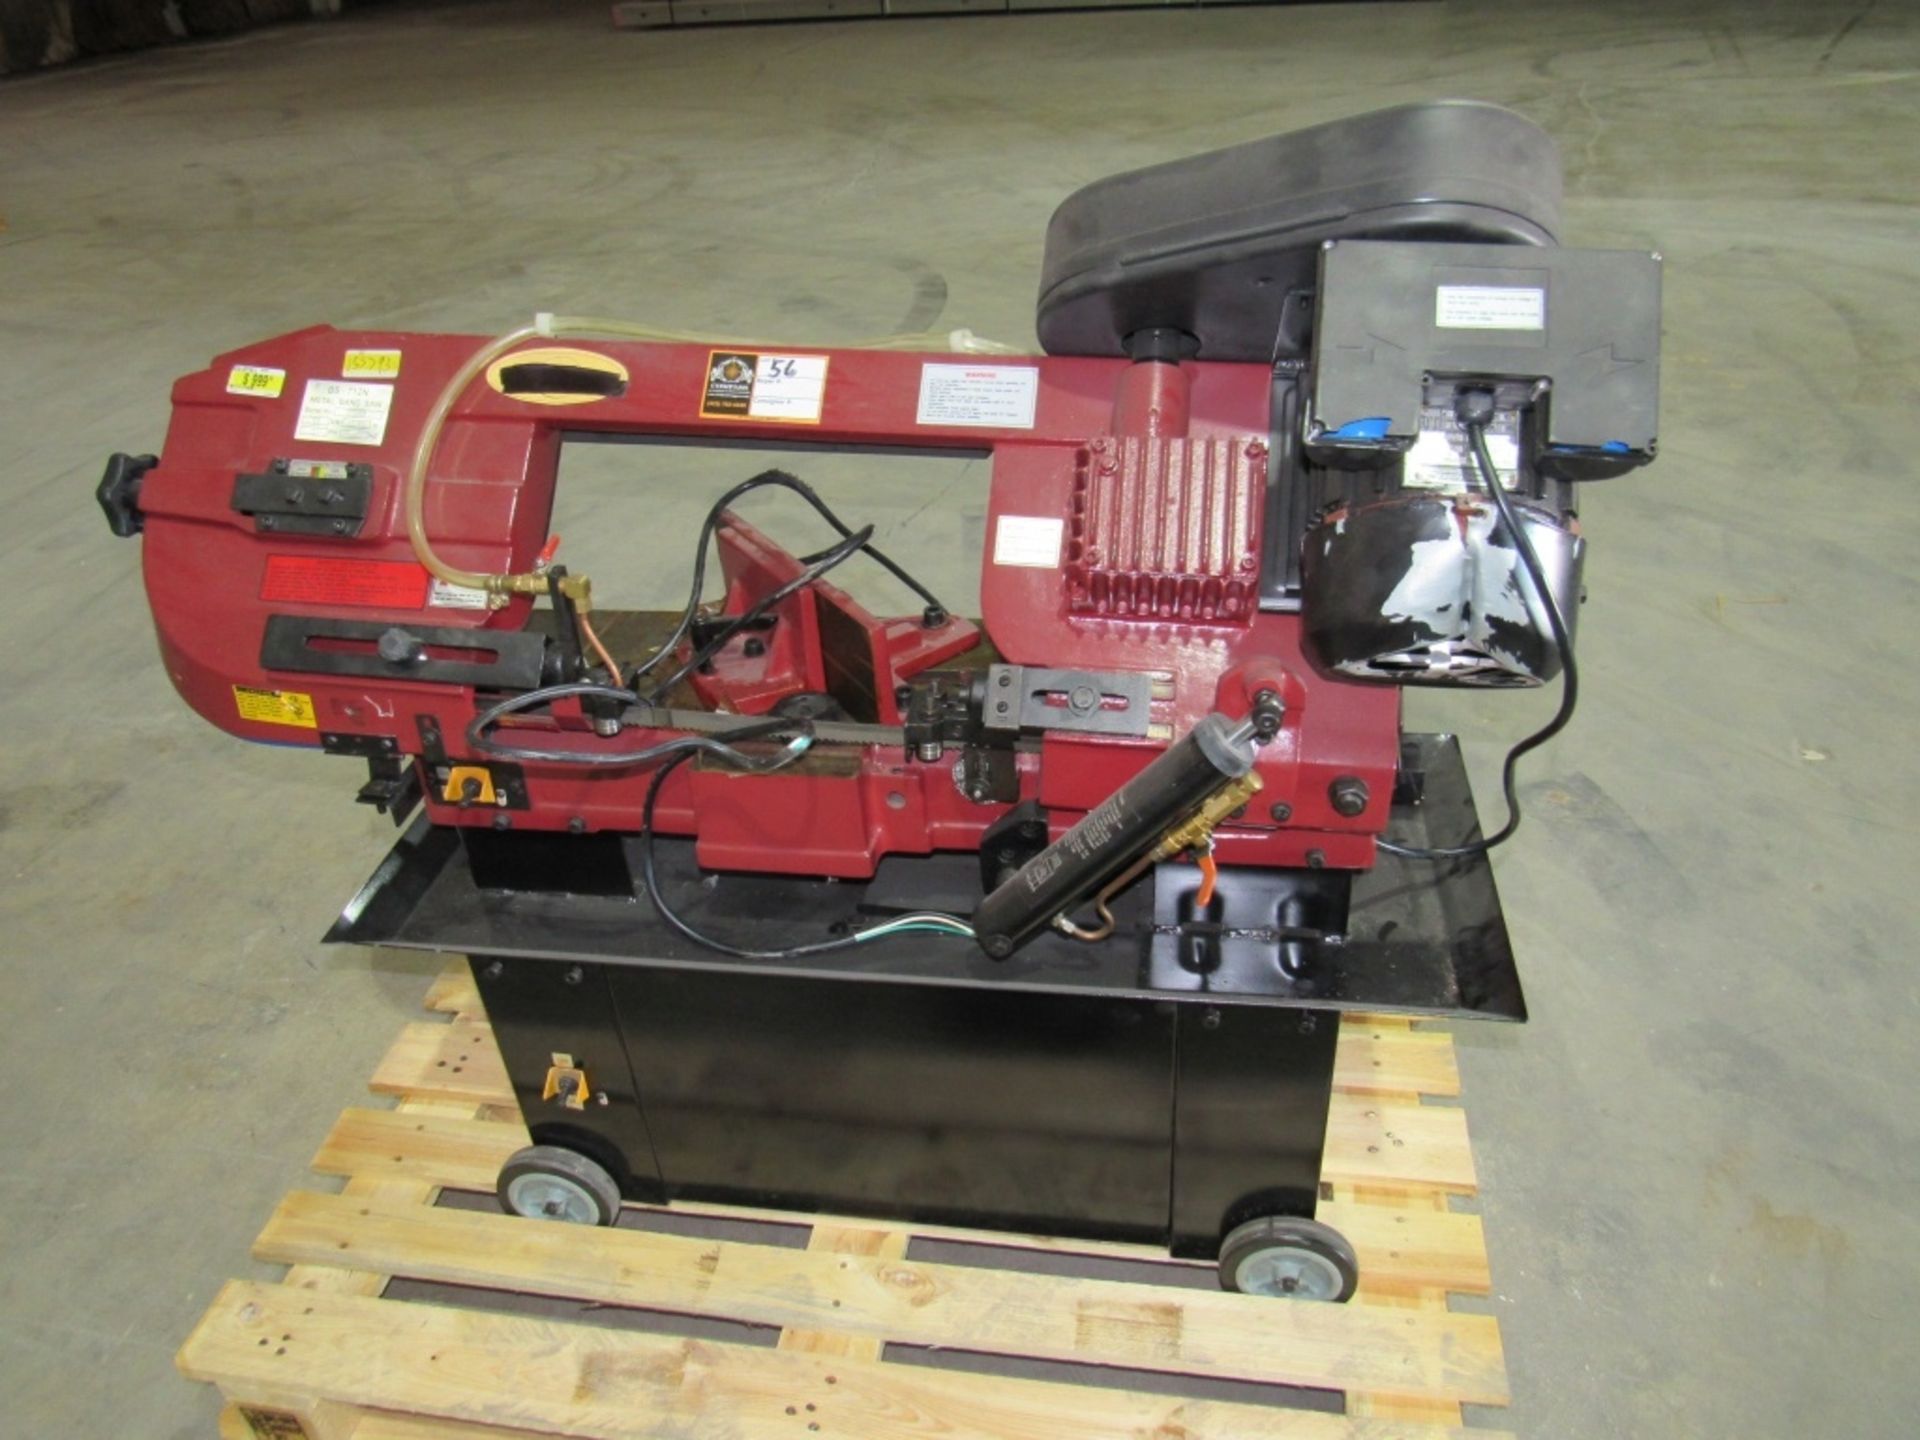 Metal Band Saw- Model - BS-712N 1.1 KW 115/230 Volts 1 Phase 60 Hz Overall Dimensions - 4' x 16" x - Image 2 of 14